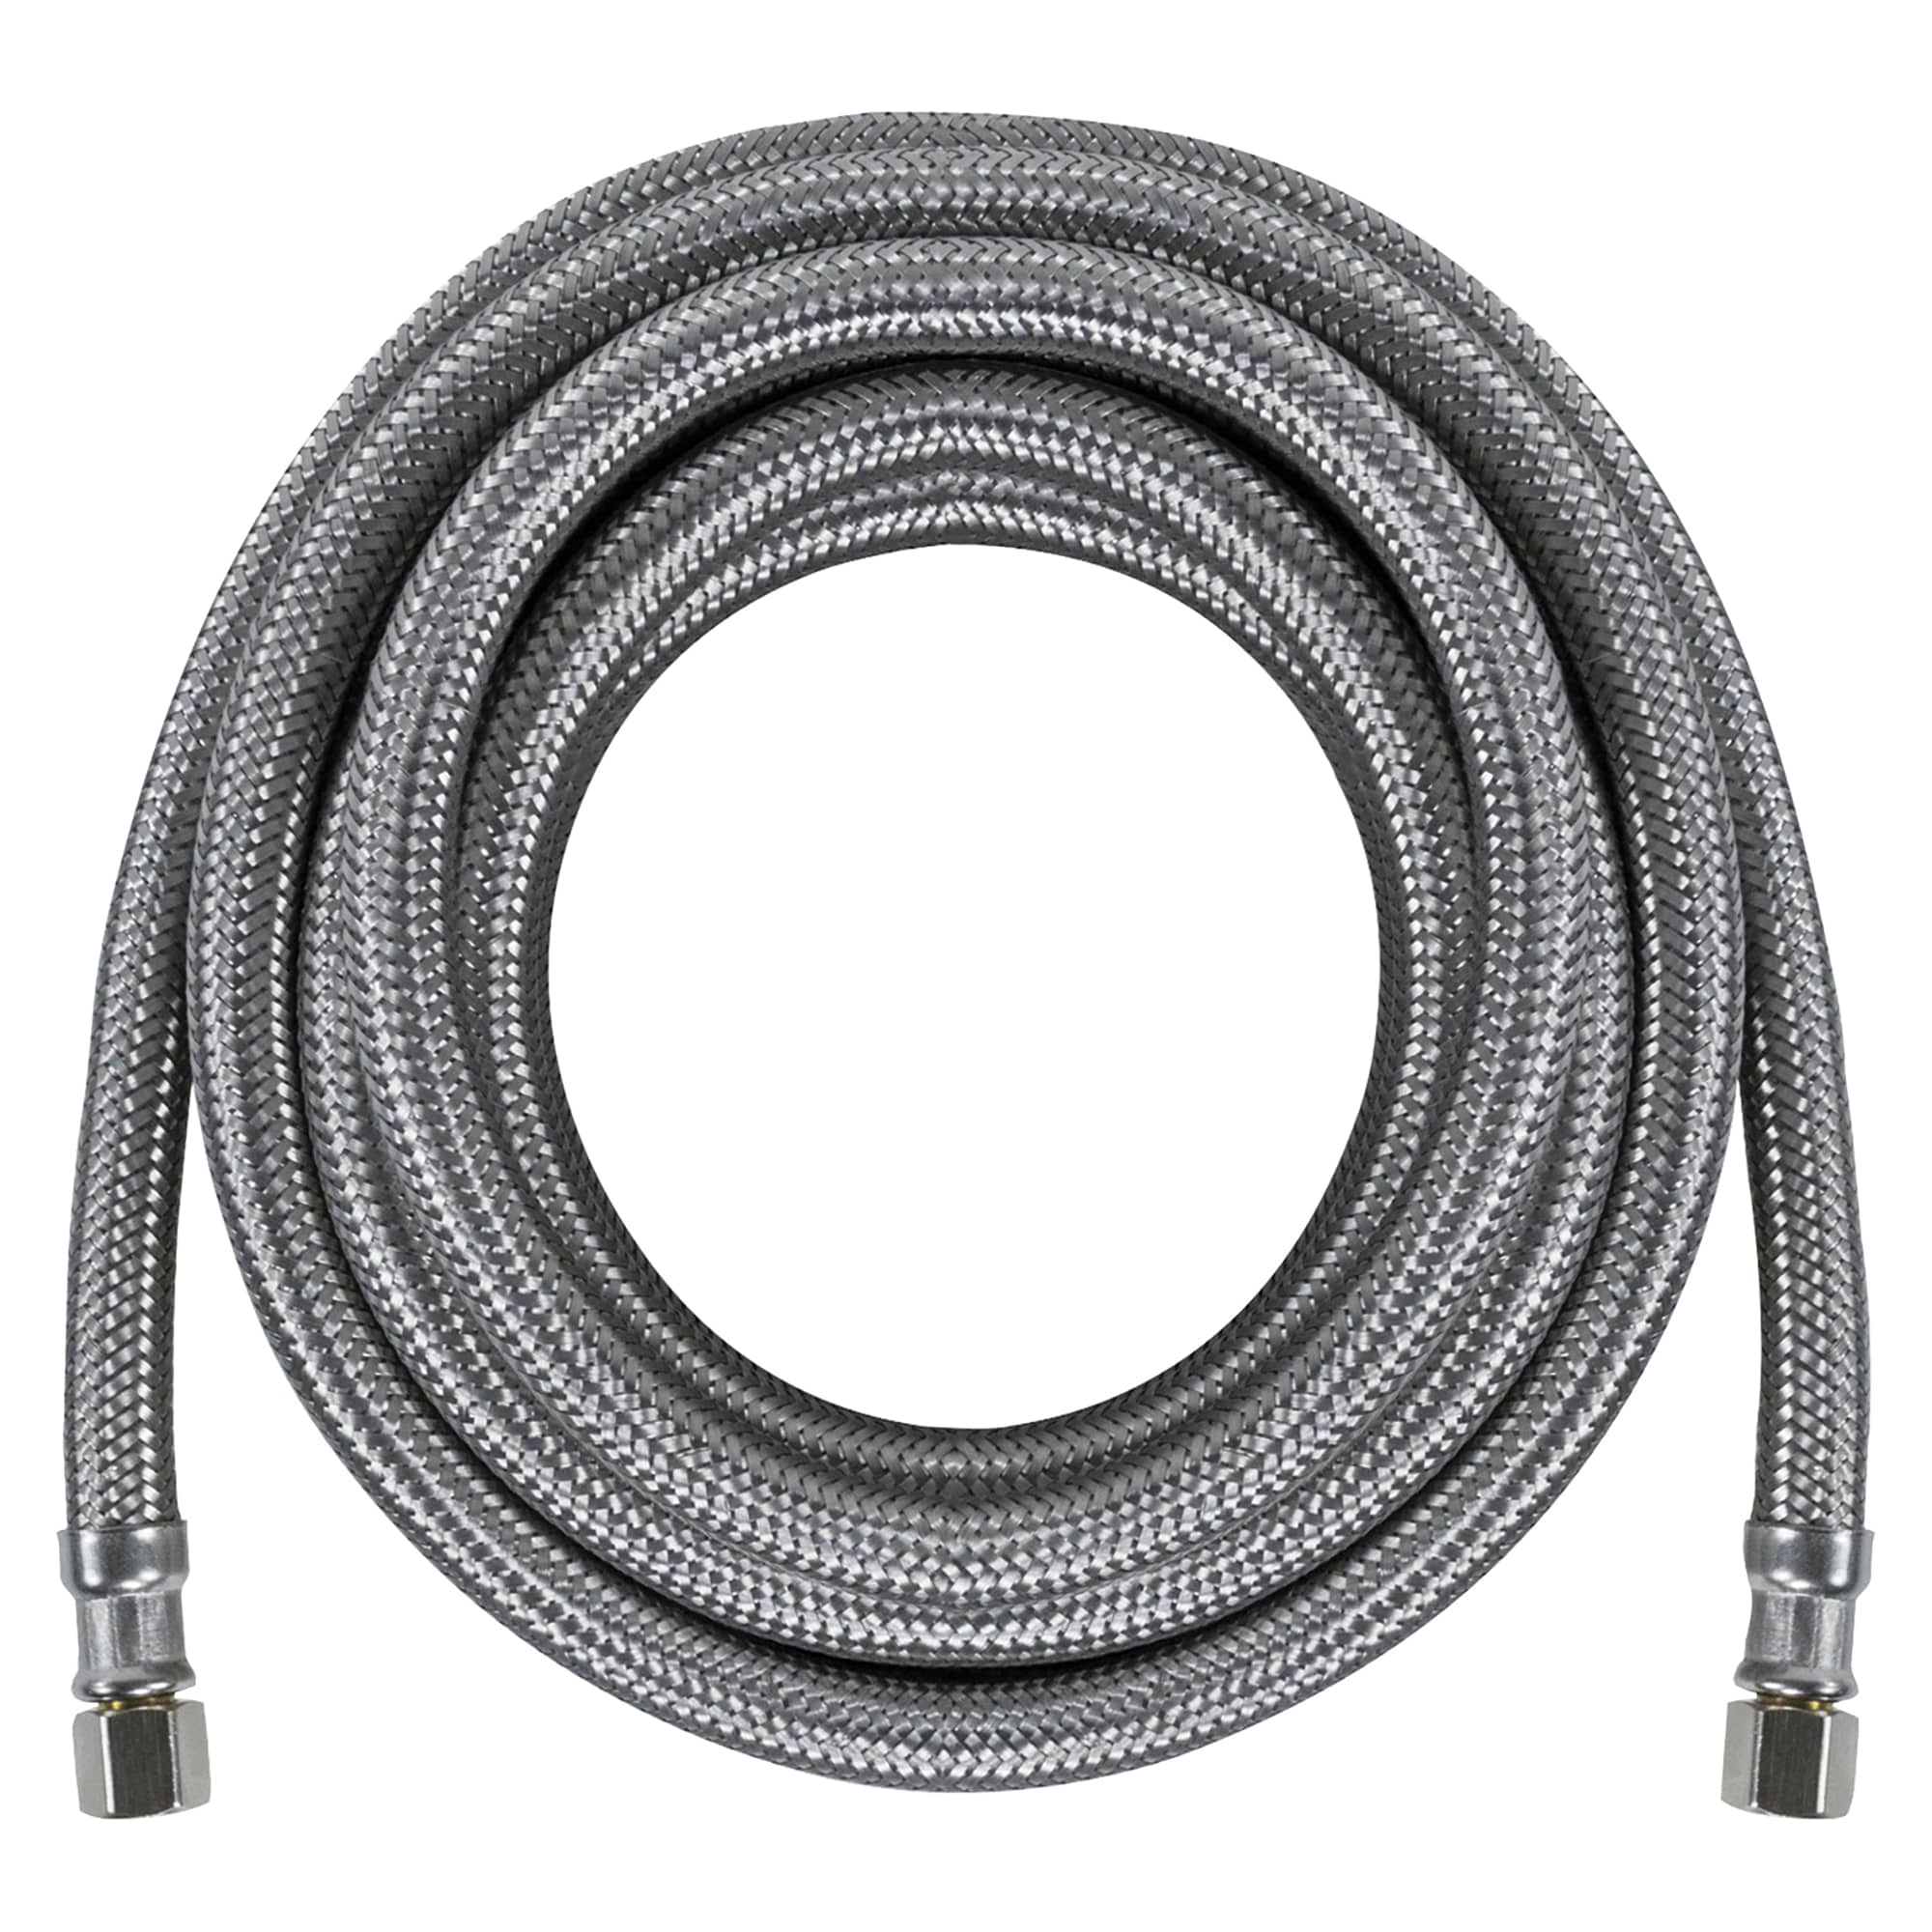 Everflow Supplies 2666-NL Lead Free Stainless Steel Braided Ice Maker Supply Line with Two 1/4 Fittings on Both Ends, 72